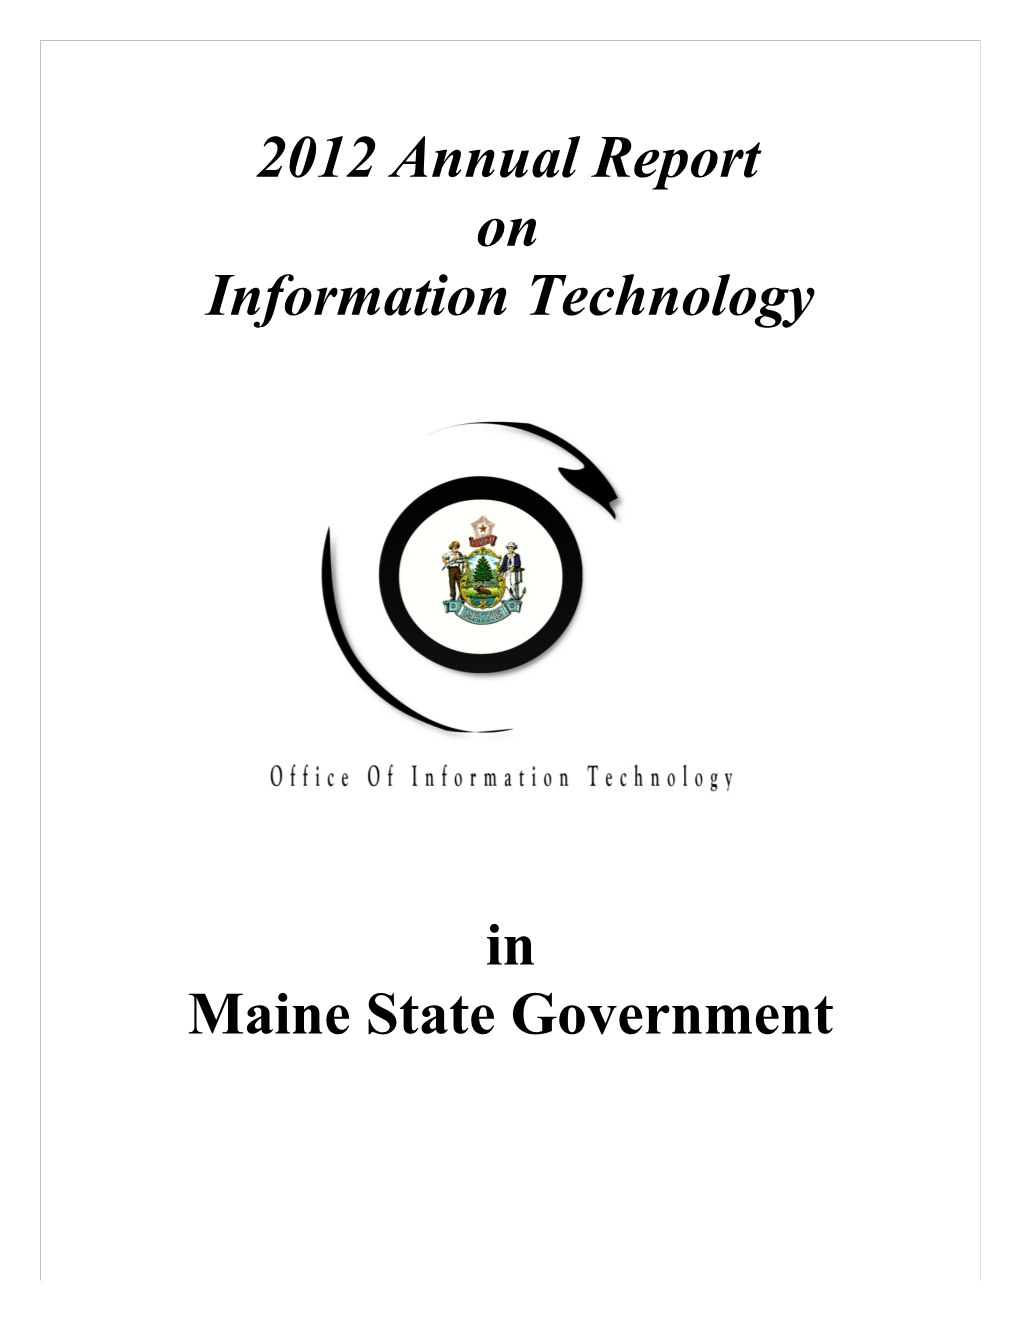 OIT Annual Report 2010